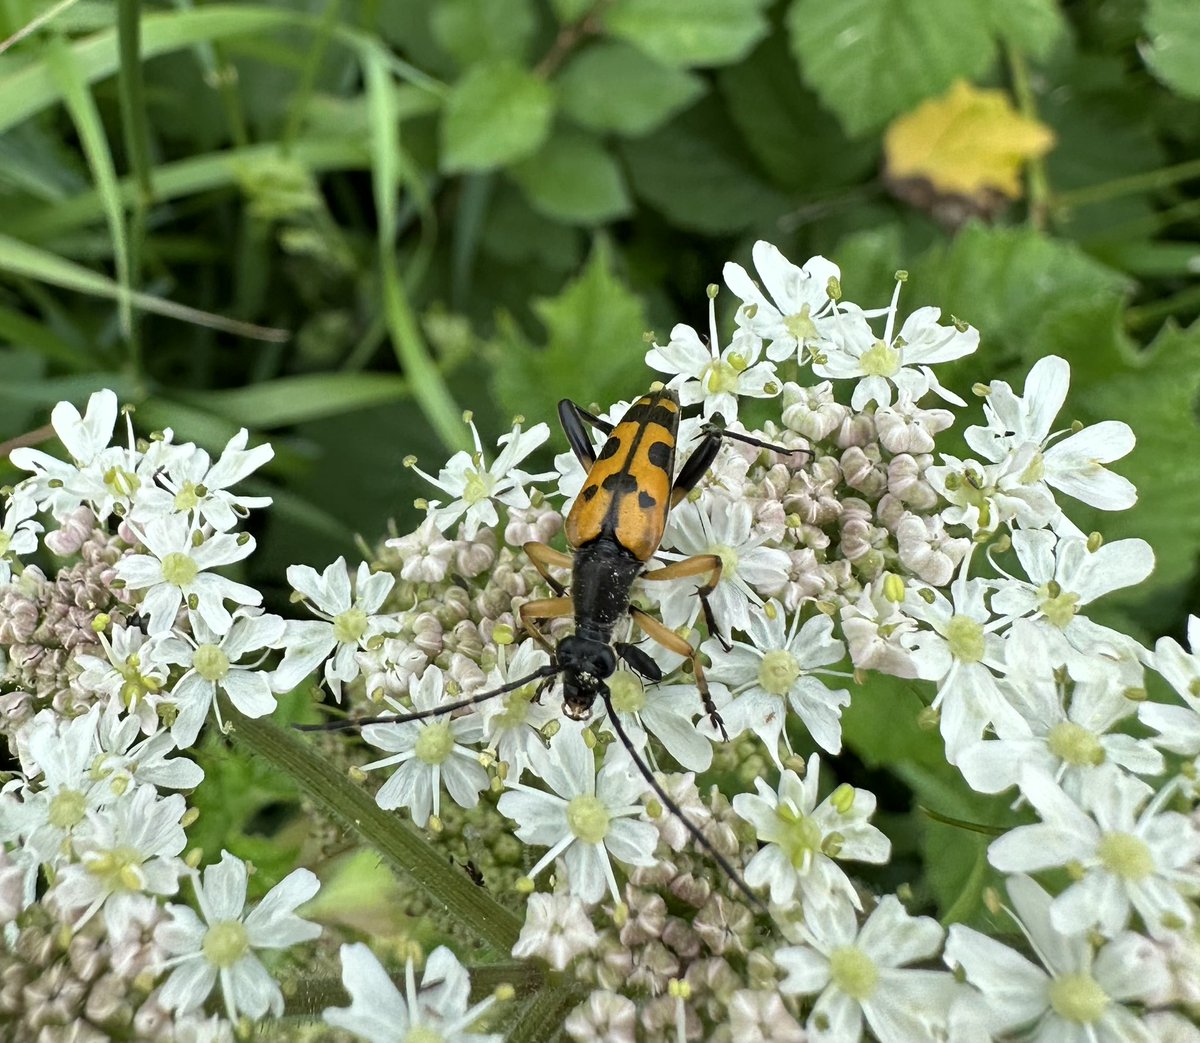 On a very nice trip to Otmoor today where I came across not one but two new (for me) longhorn beetles, firstly this very lovely Rutpela maculata @RSPBotmoor @NLonghornRS